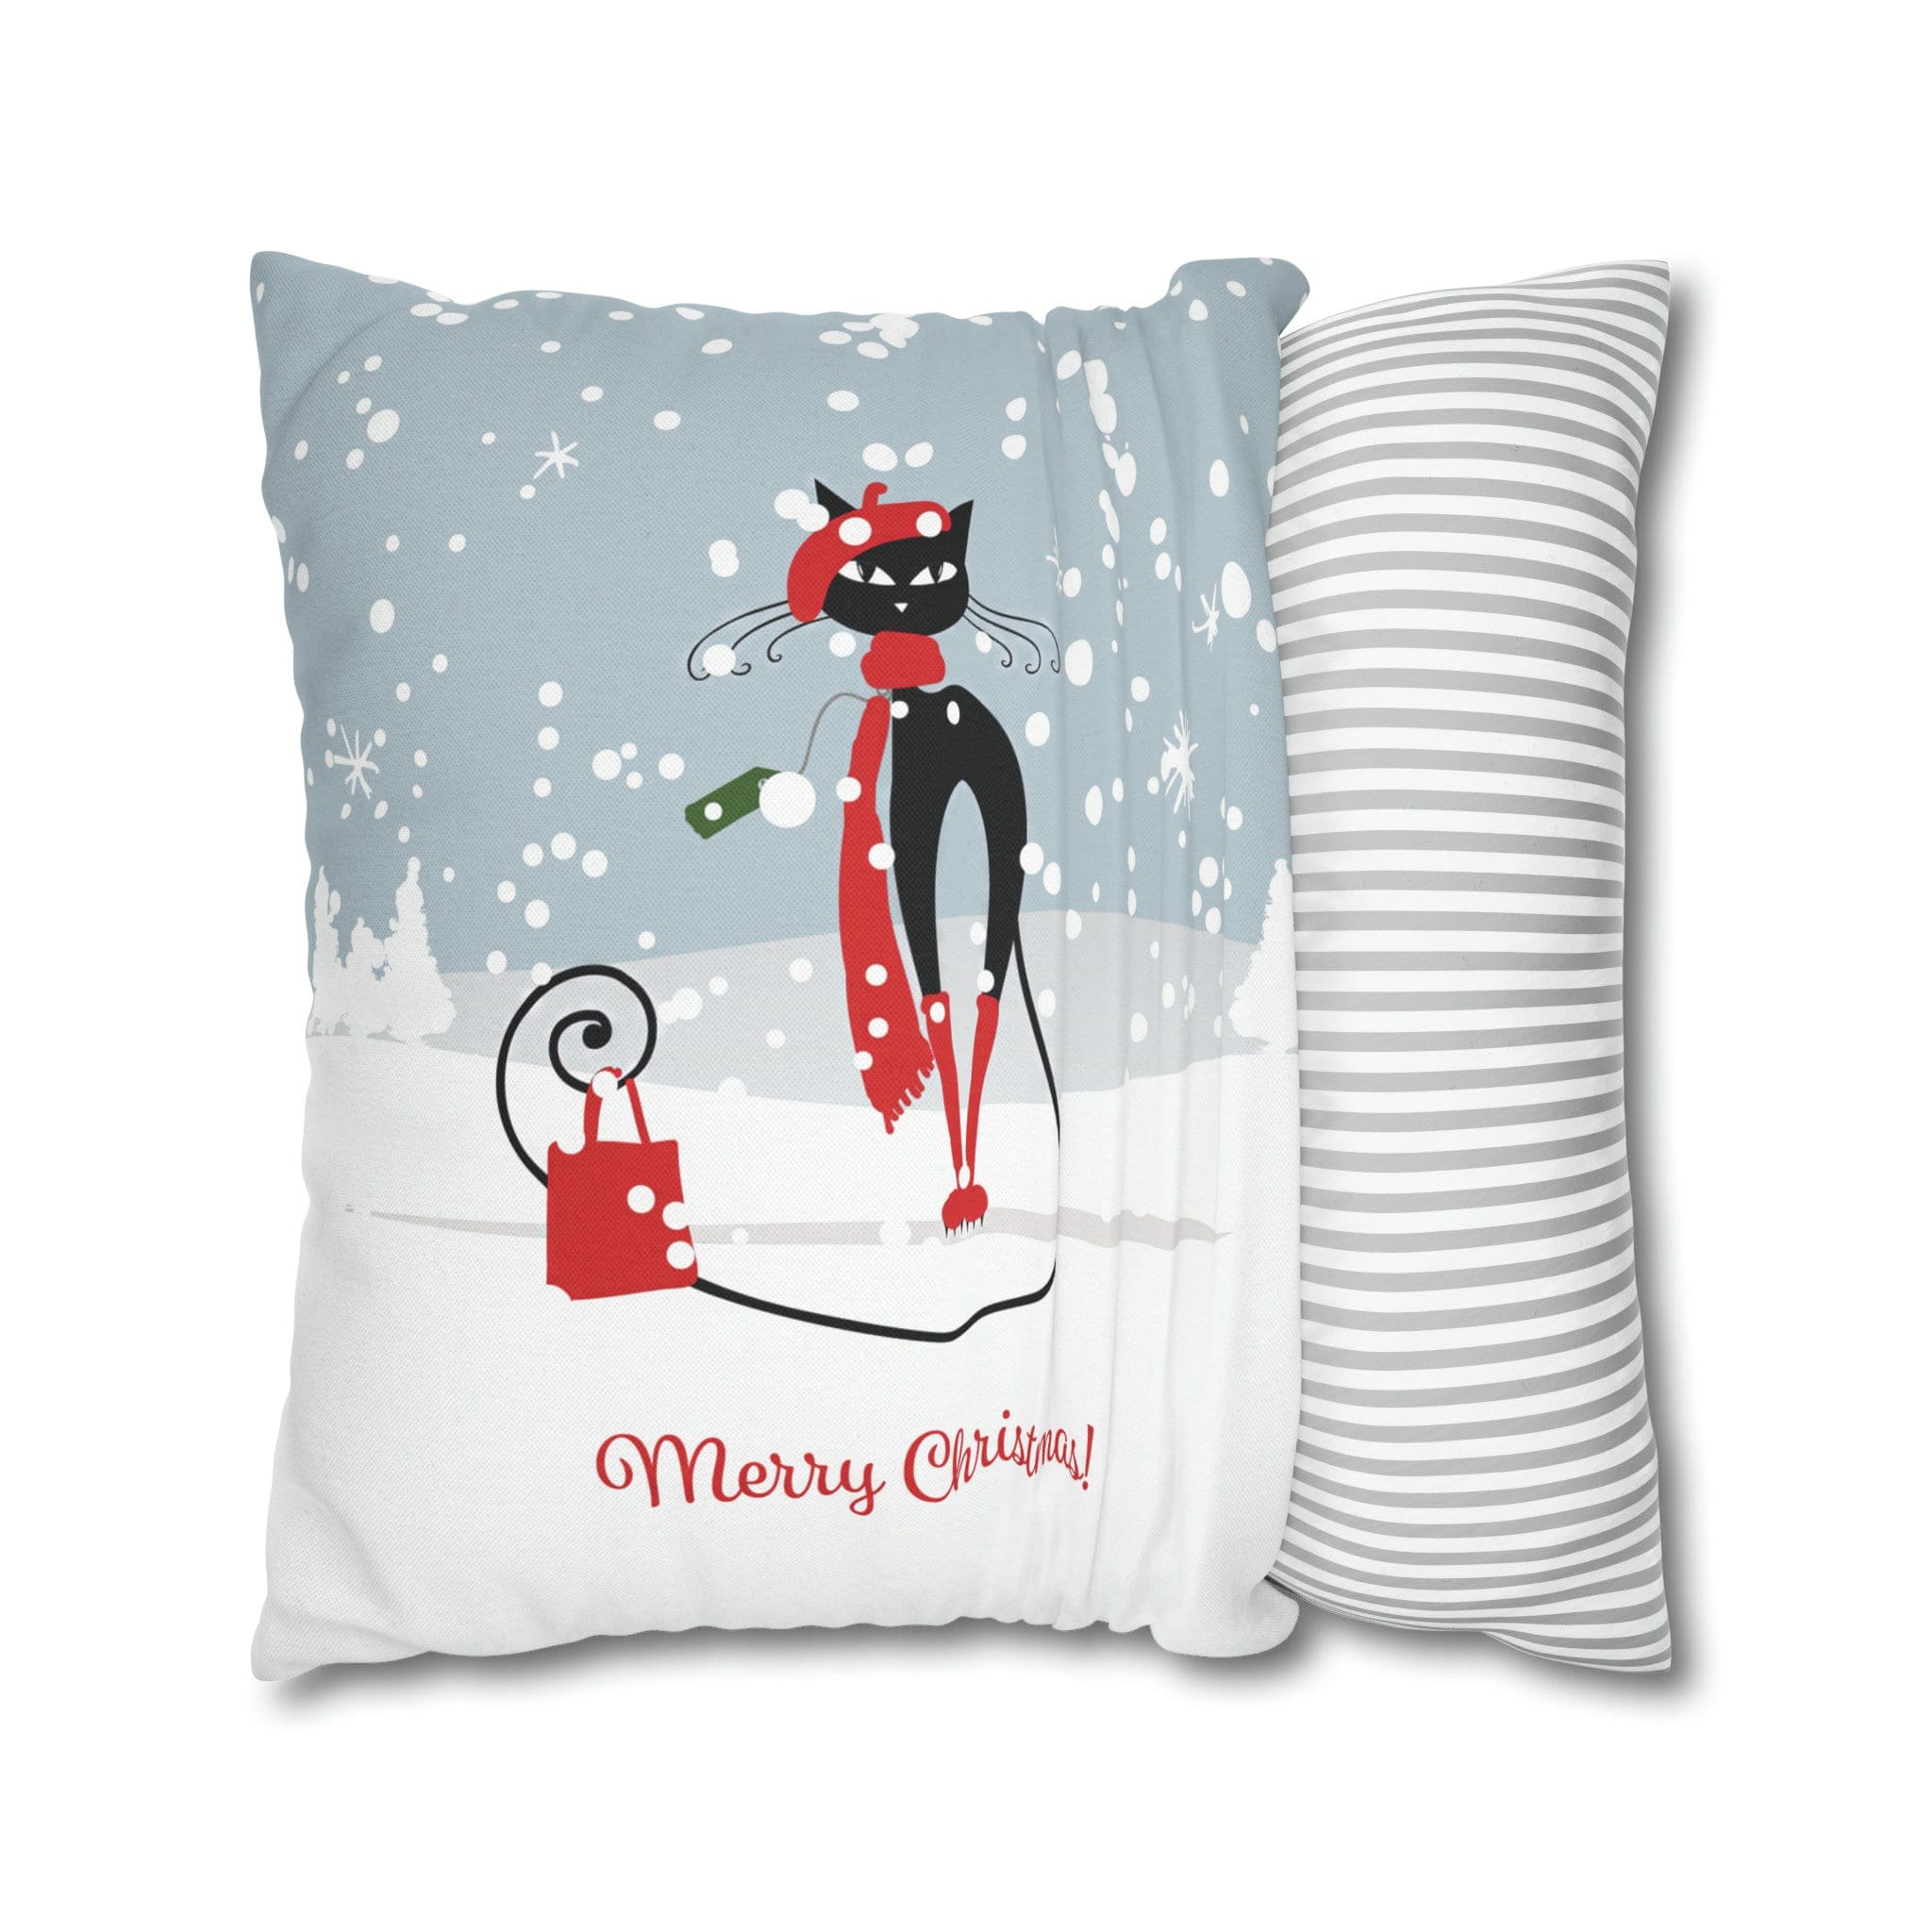 Kate McEnroe New York Atomic Cat Retro Christmas Pillow Cover, Mid Century Modern Snowy Christmas Yellow Cushion Covers, MCM Holiday Pillow CaseThrow Pillow Covers10100933100228823475